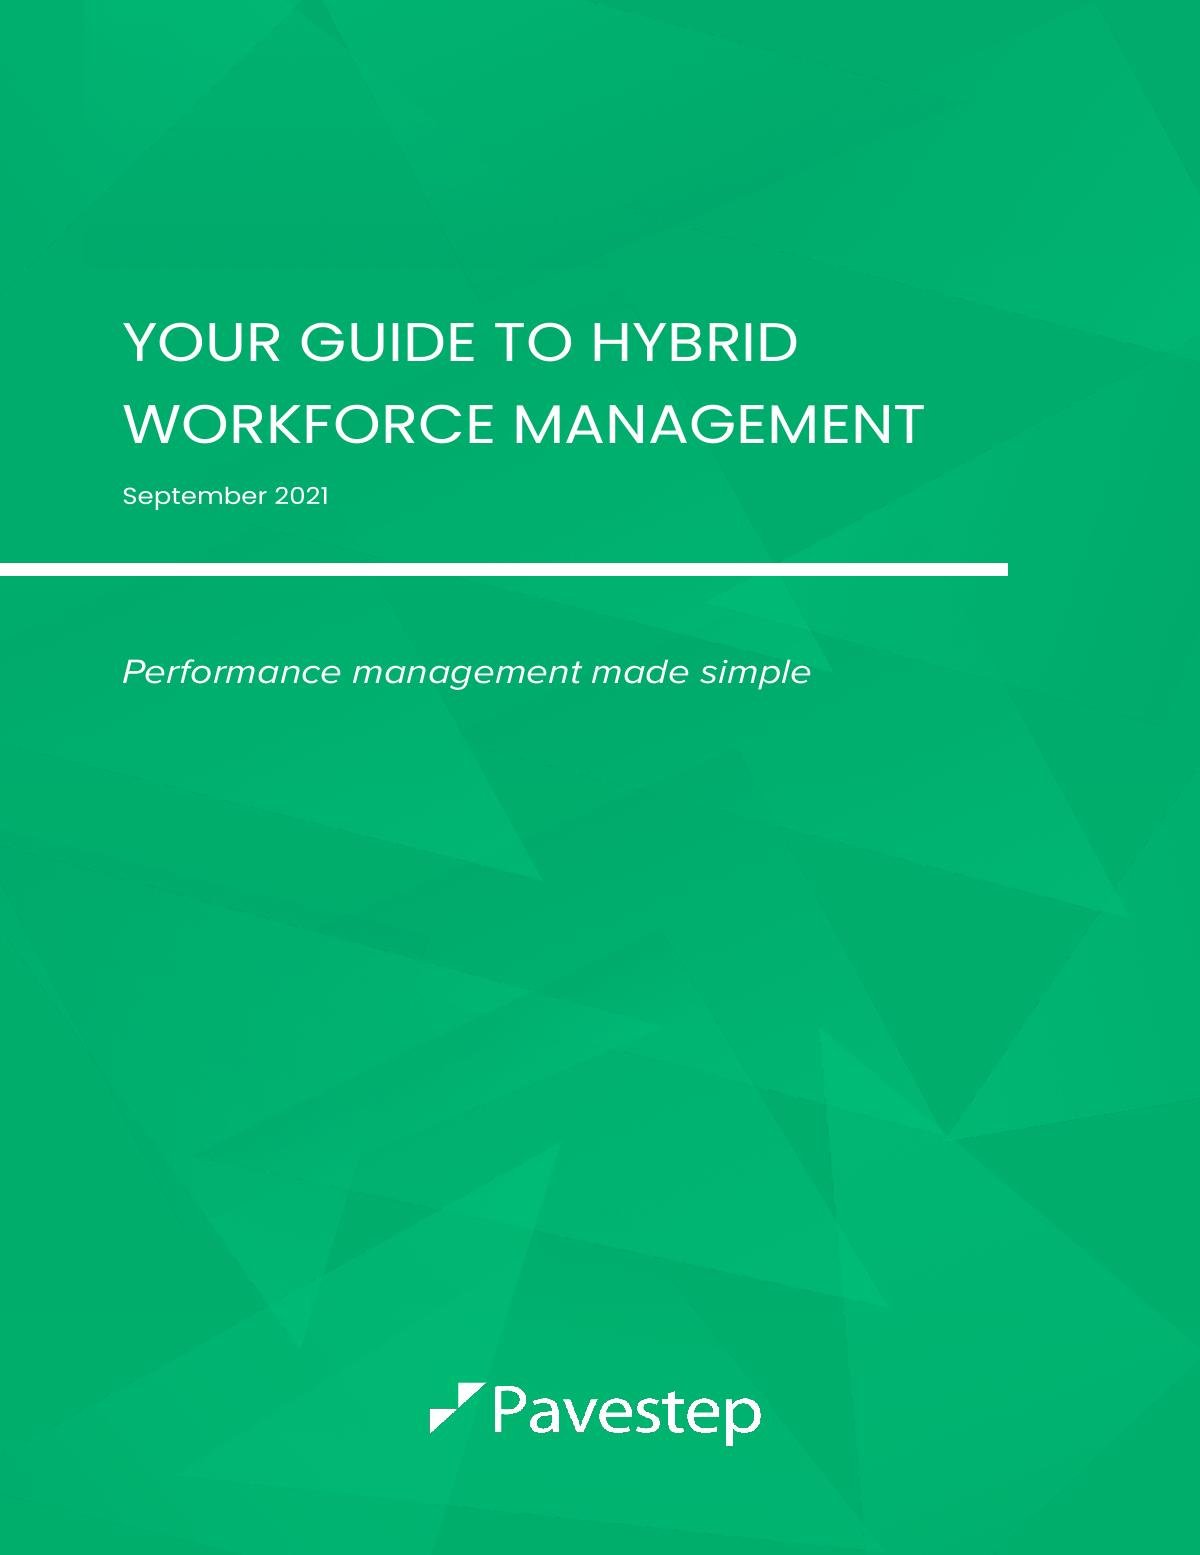 Your Guide to Hybrid Workforce Management